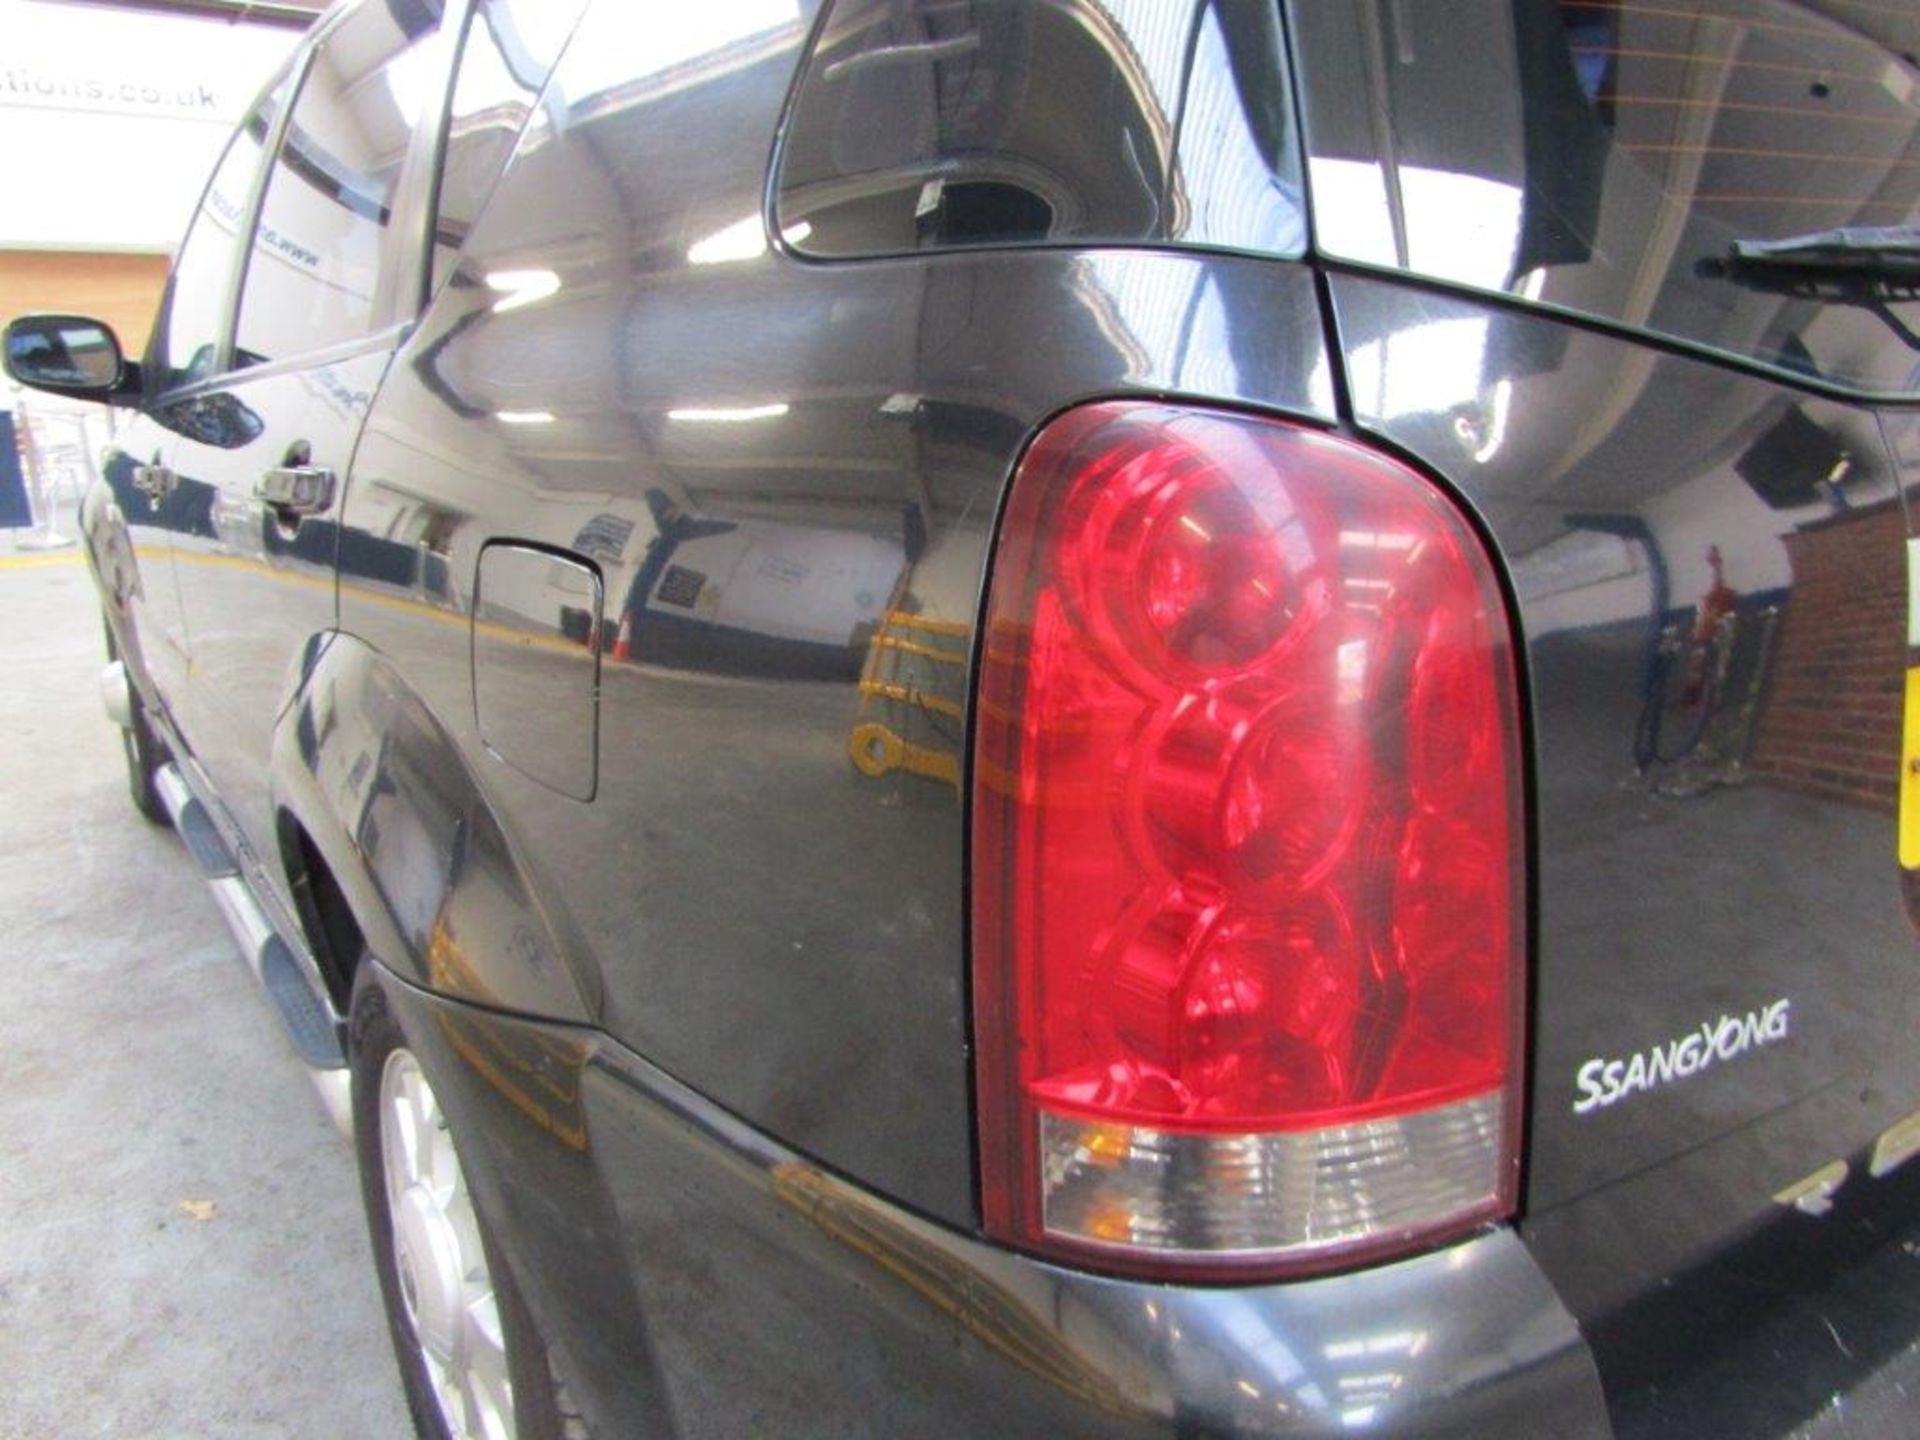 55 05 Ssangyong Rexton RX270 S - Image 18 of 21